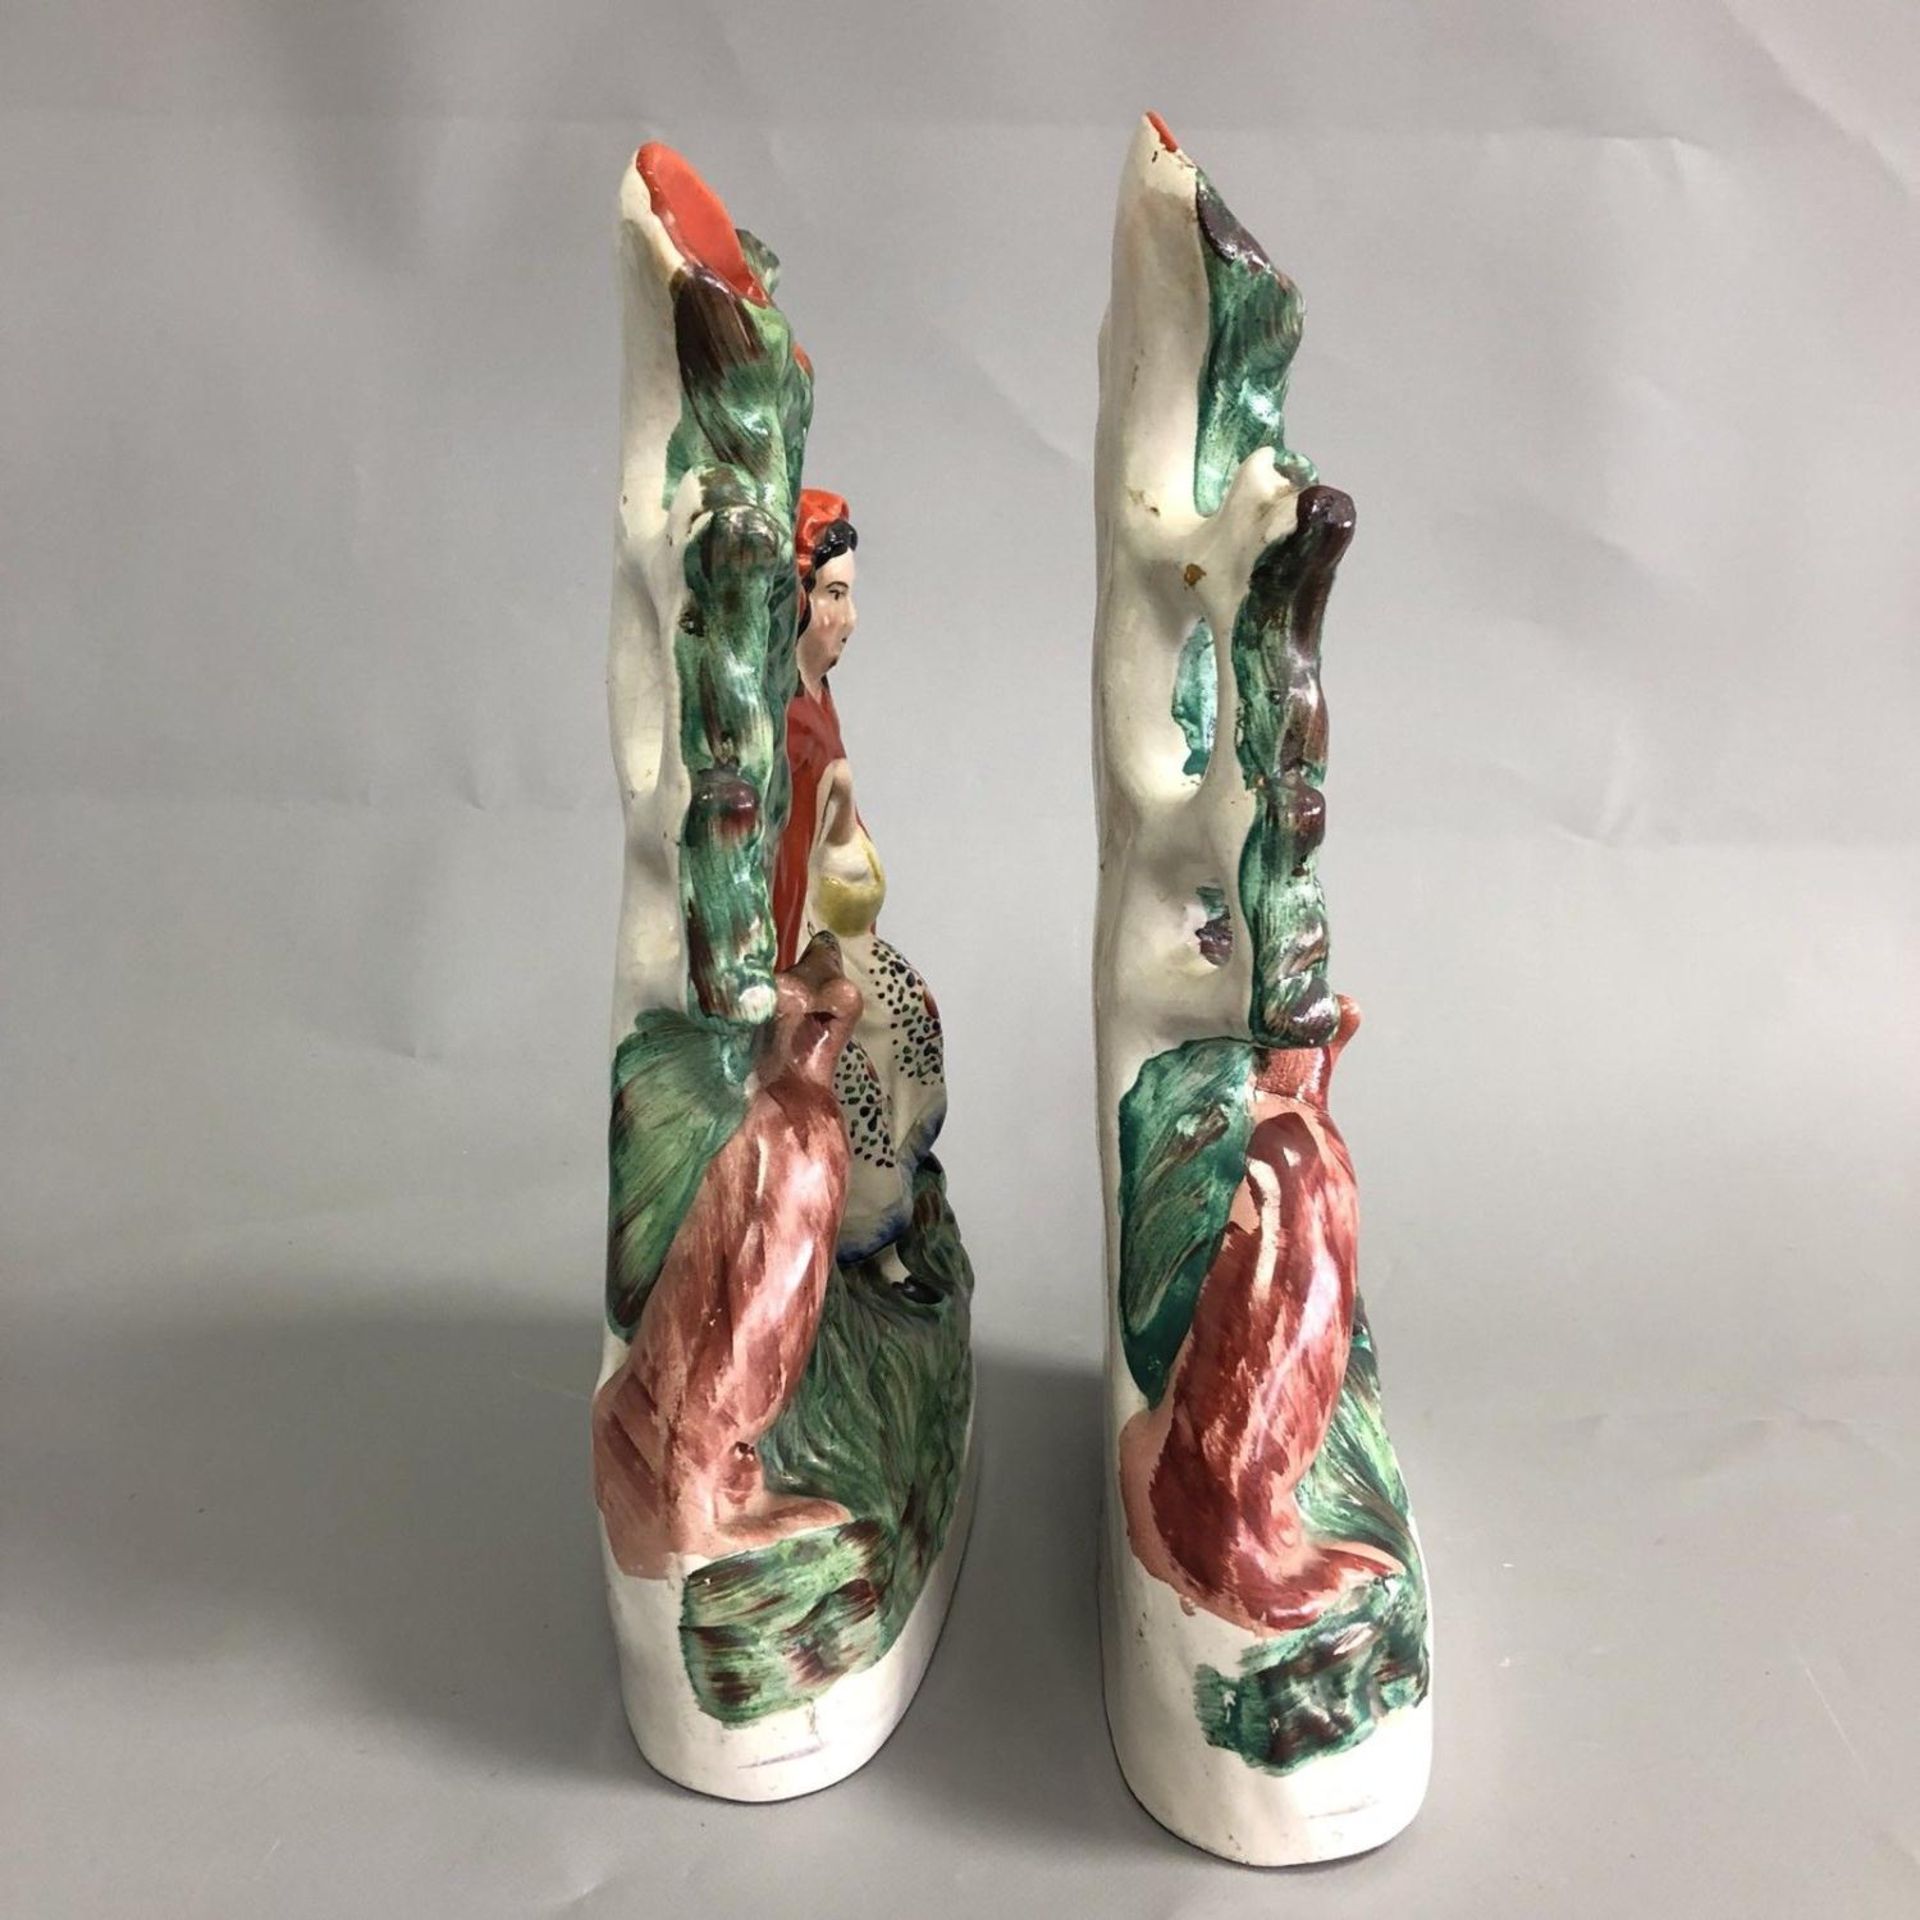 Antique Staffordshire pottery pair of Red Riding Hood and the Wolf spill vases - Image 2 of 2